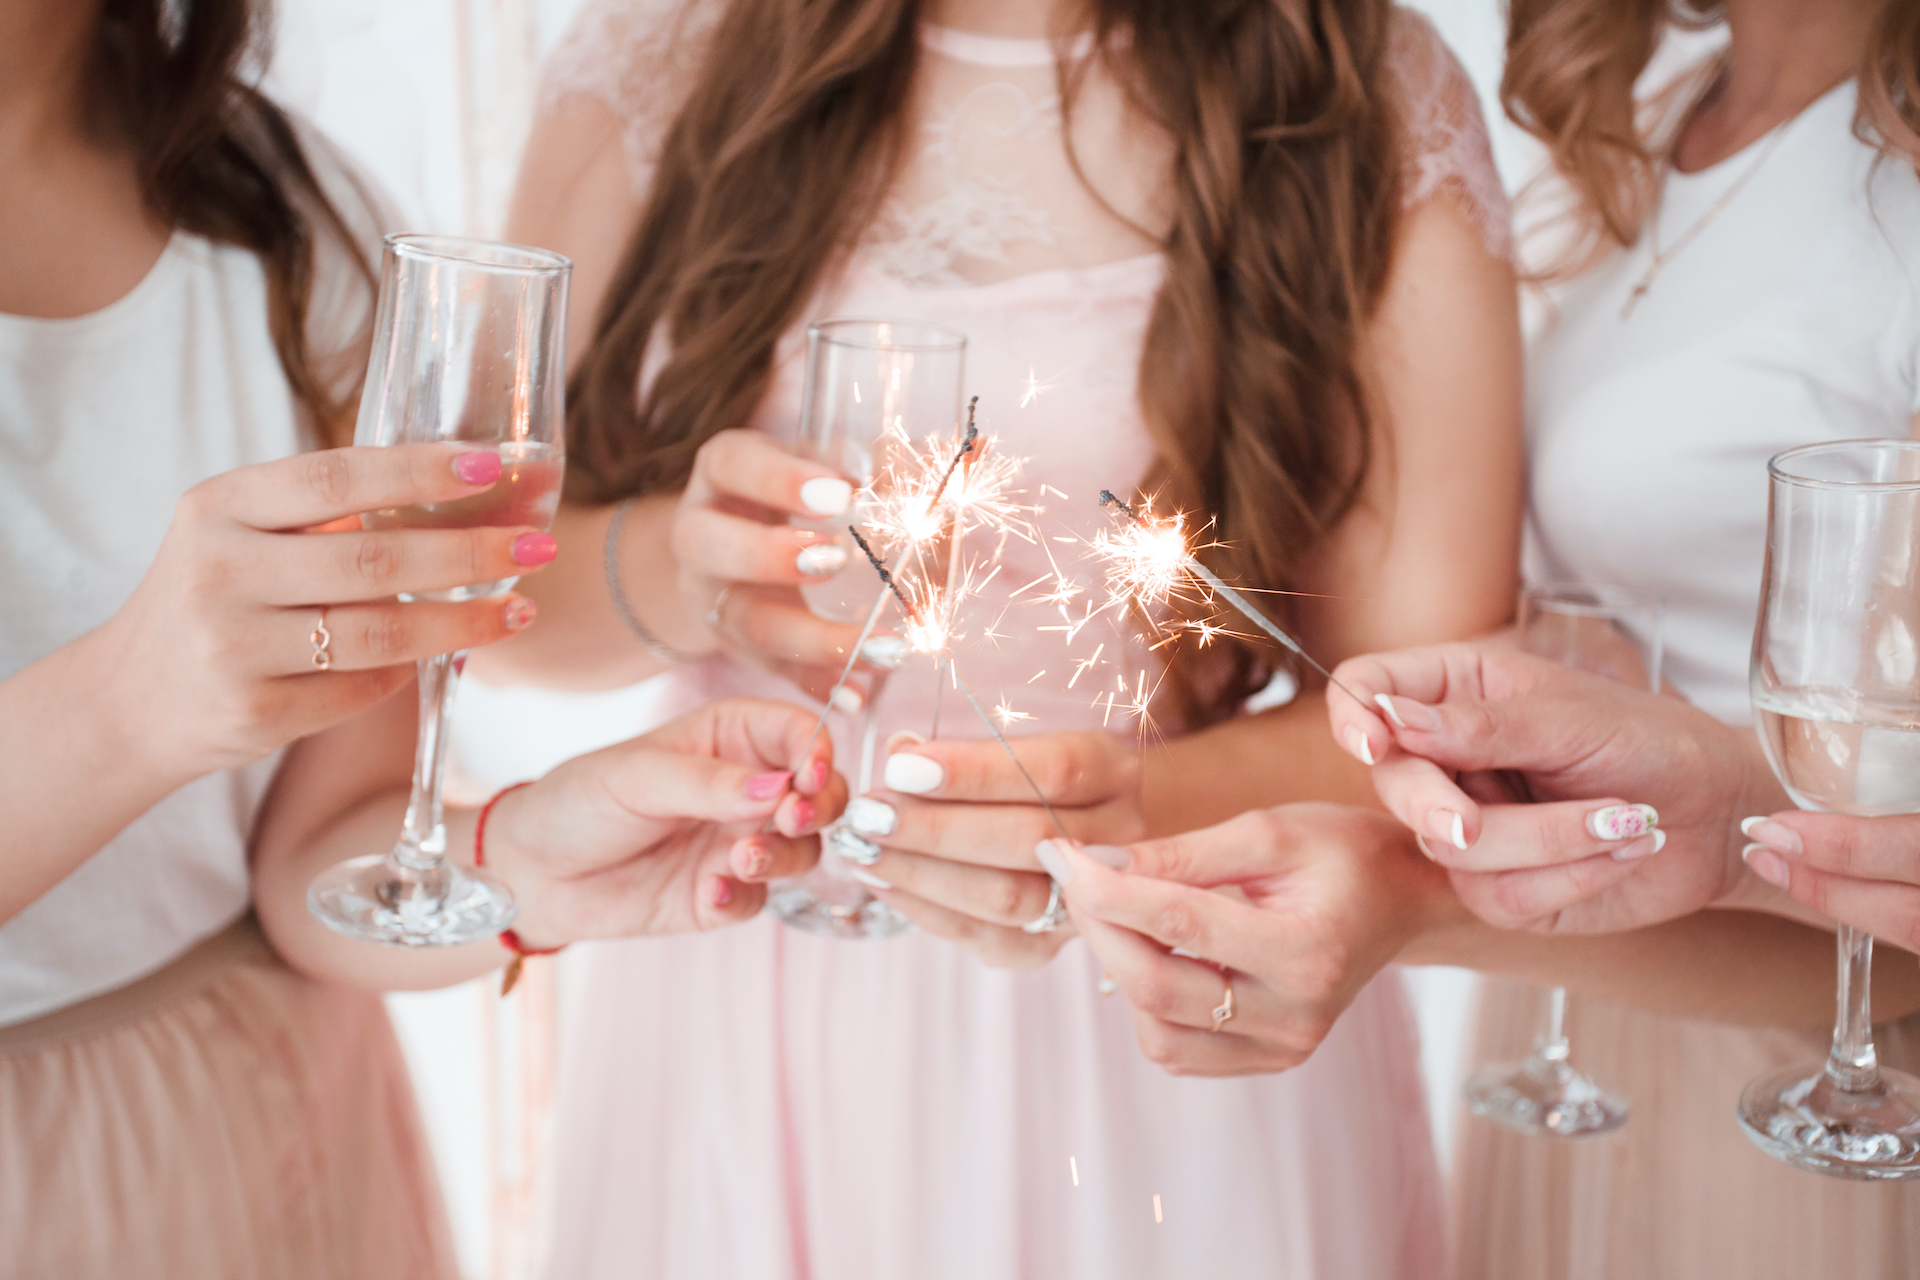 gorgeous cheerful bachelorette party in pink with champagne, sparklers. Pretty girls having fun at a bachelorette party